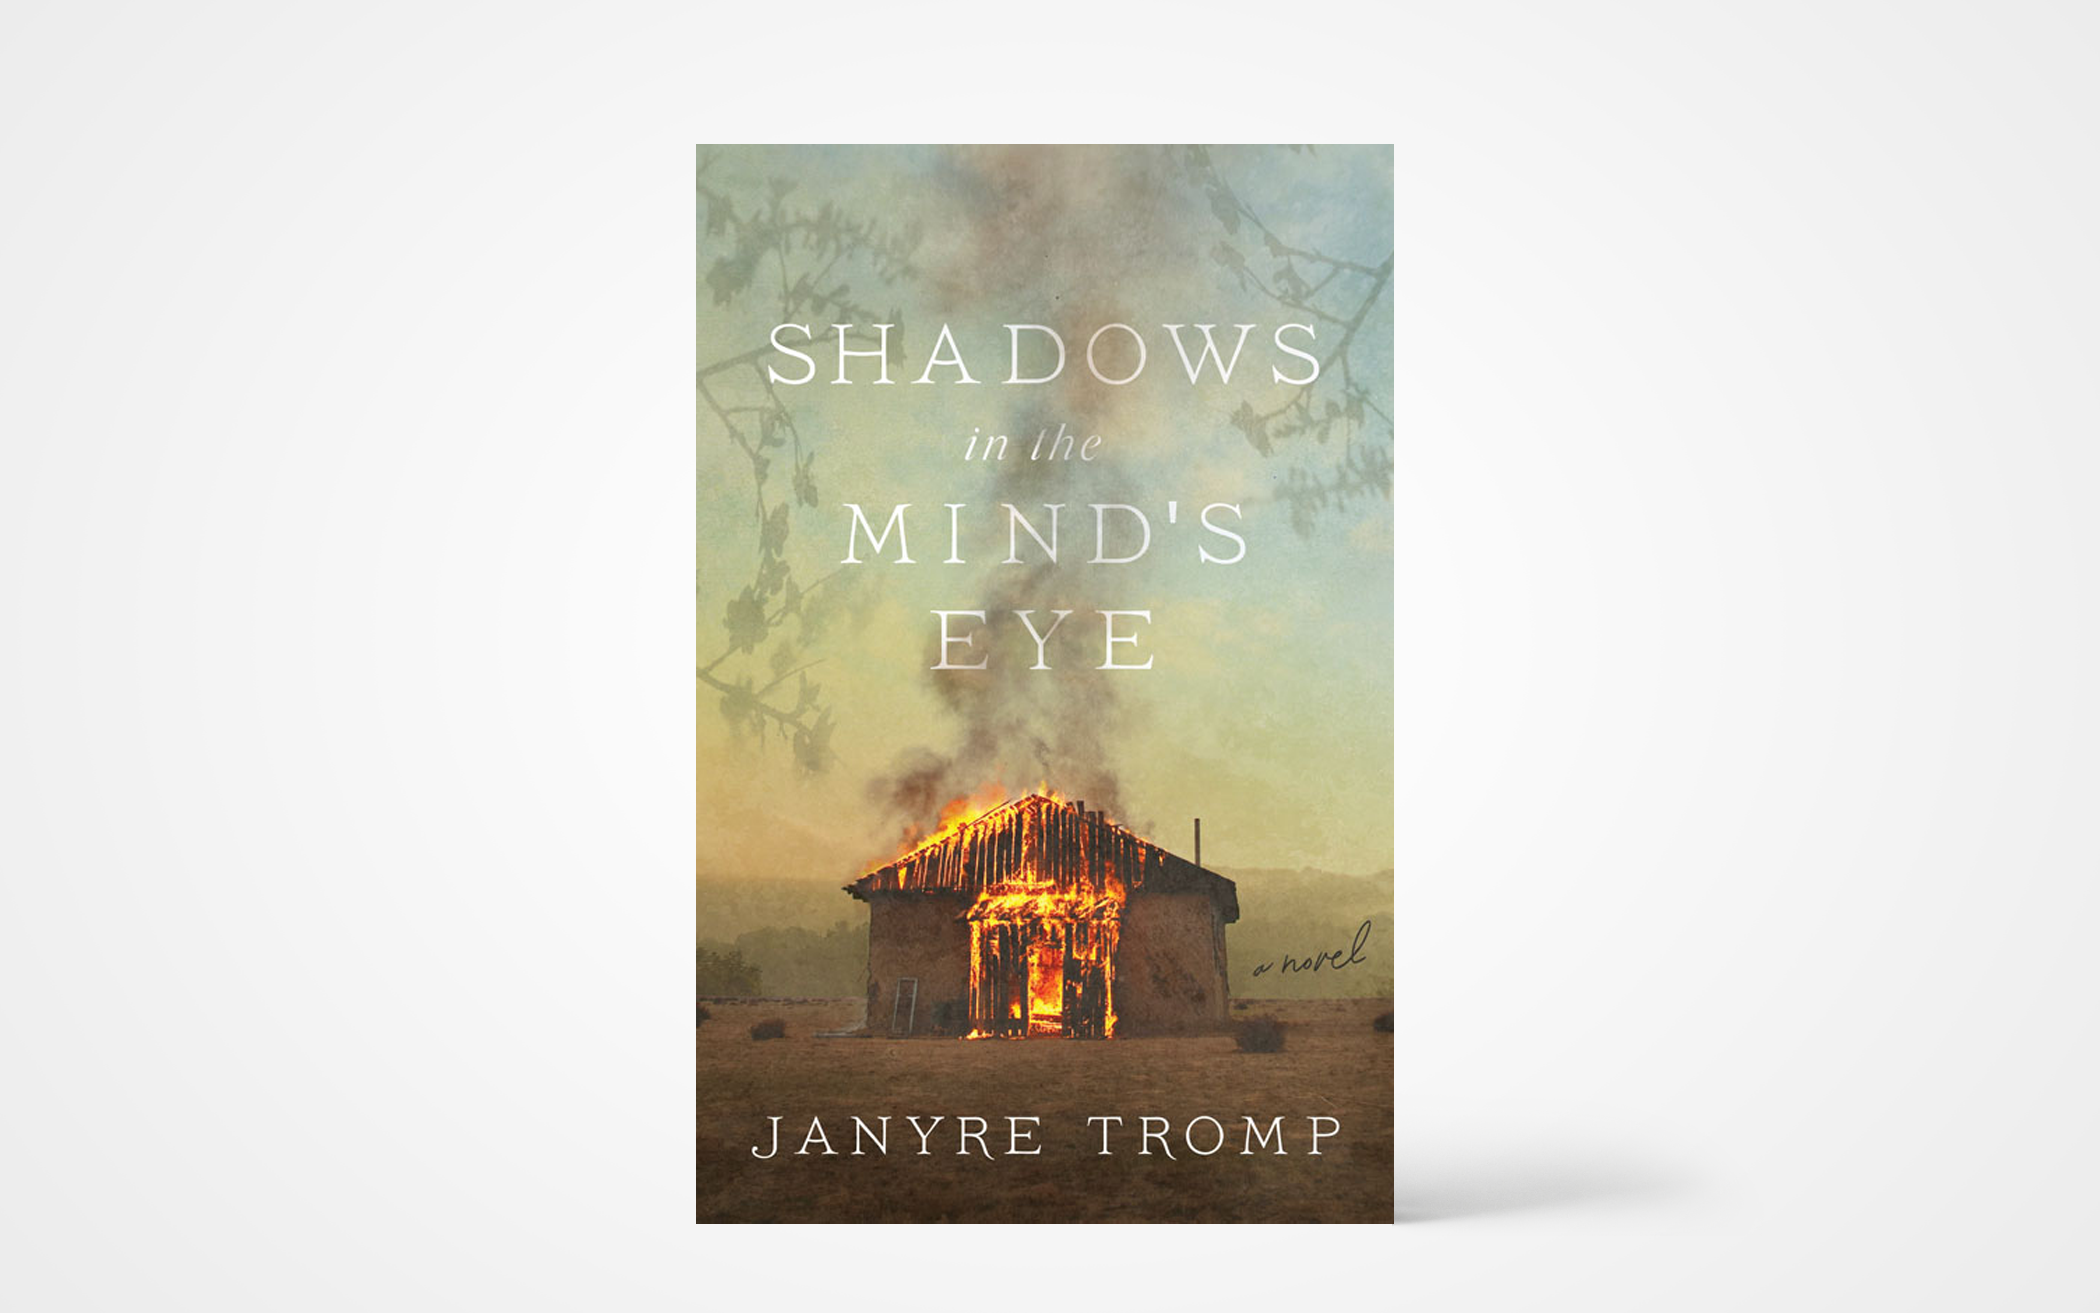 Shadows in the Mind’s Eye